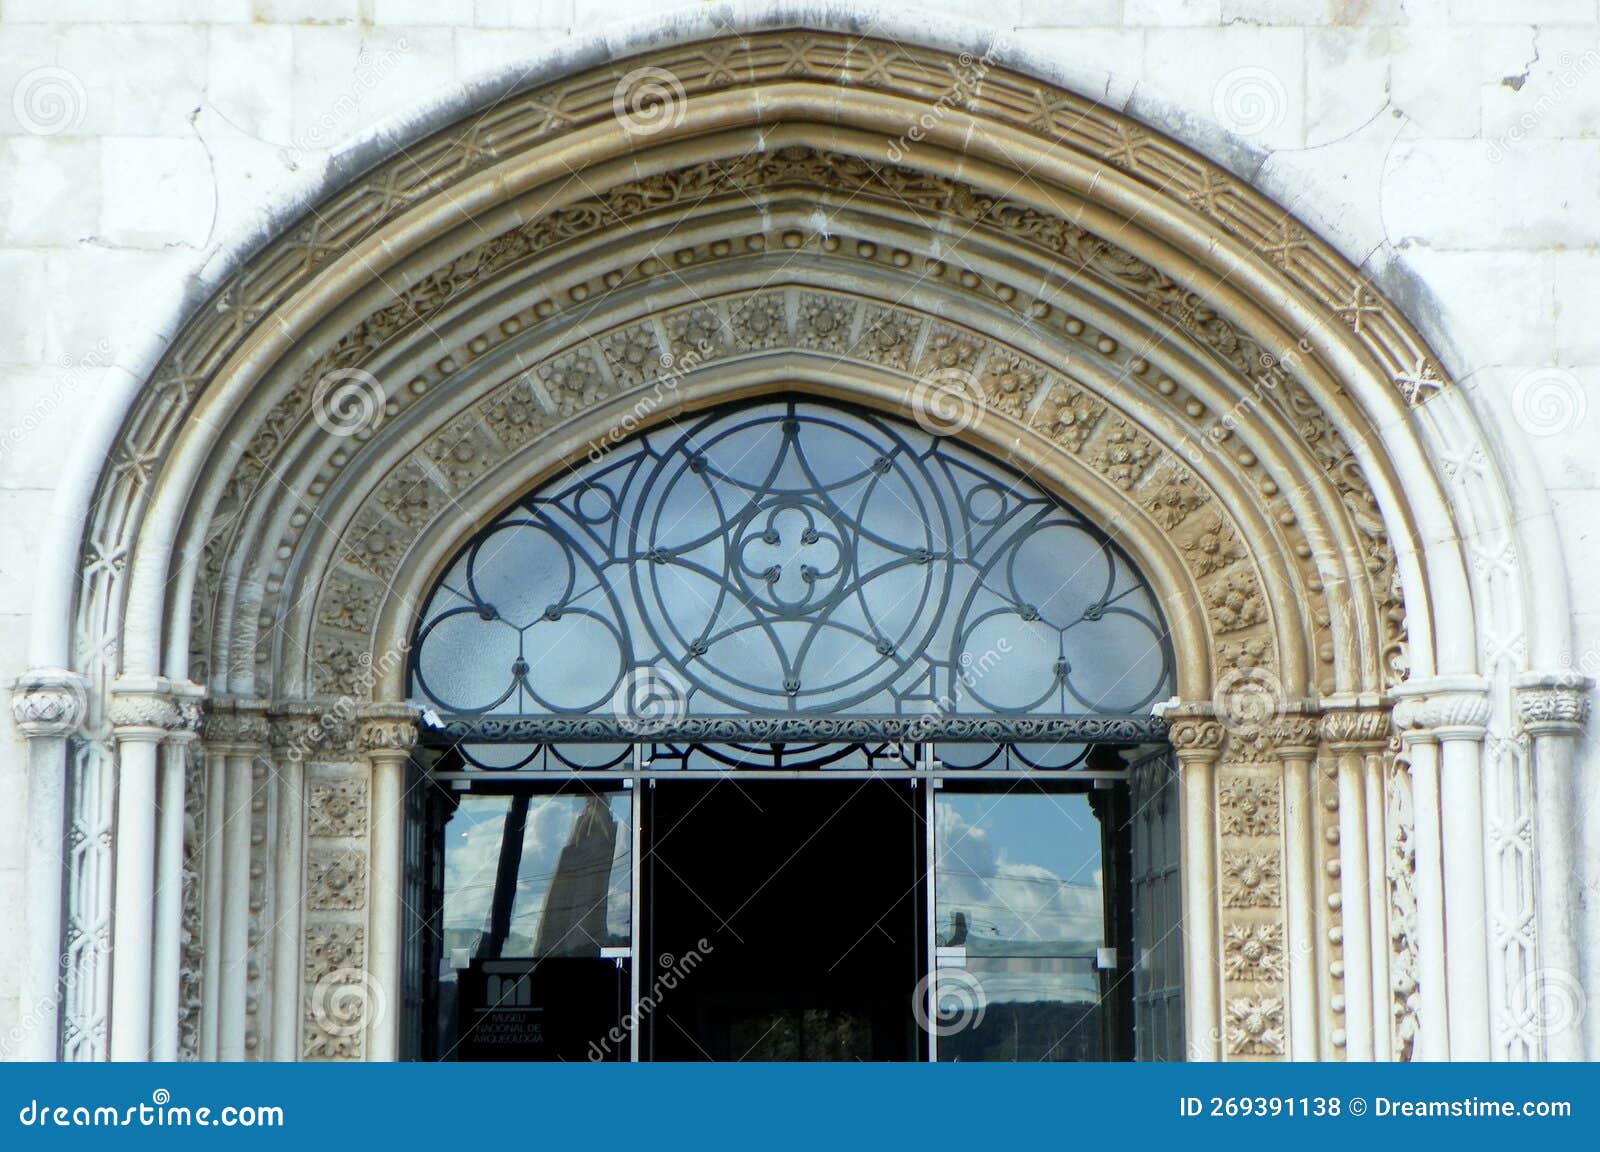 portugal, lisbon, jeronimos monastery, national museum of archeology, entrance to the museum